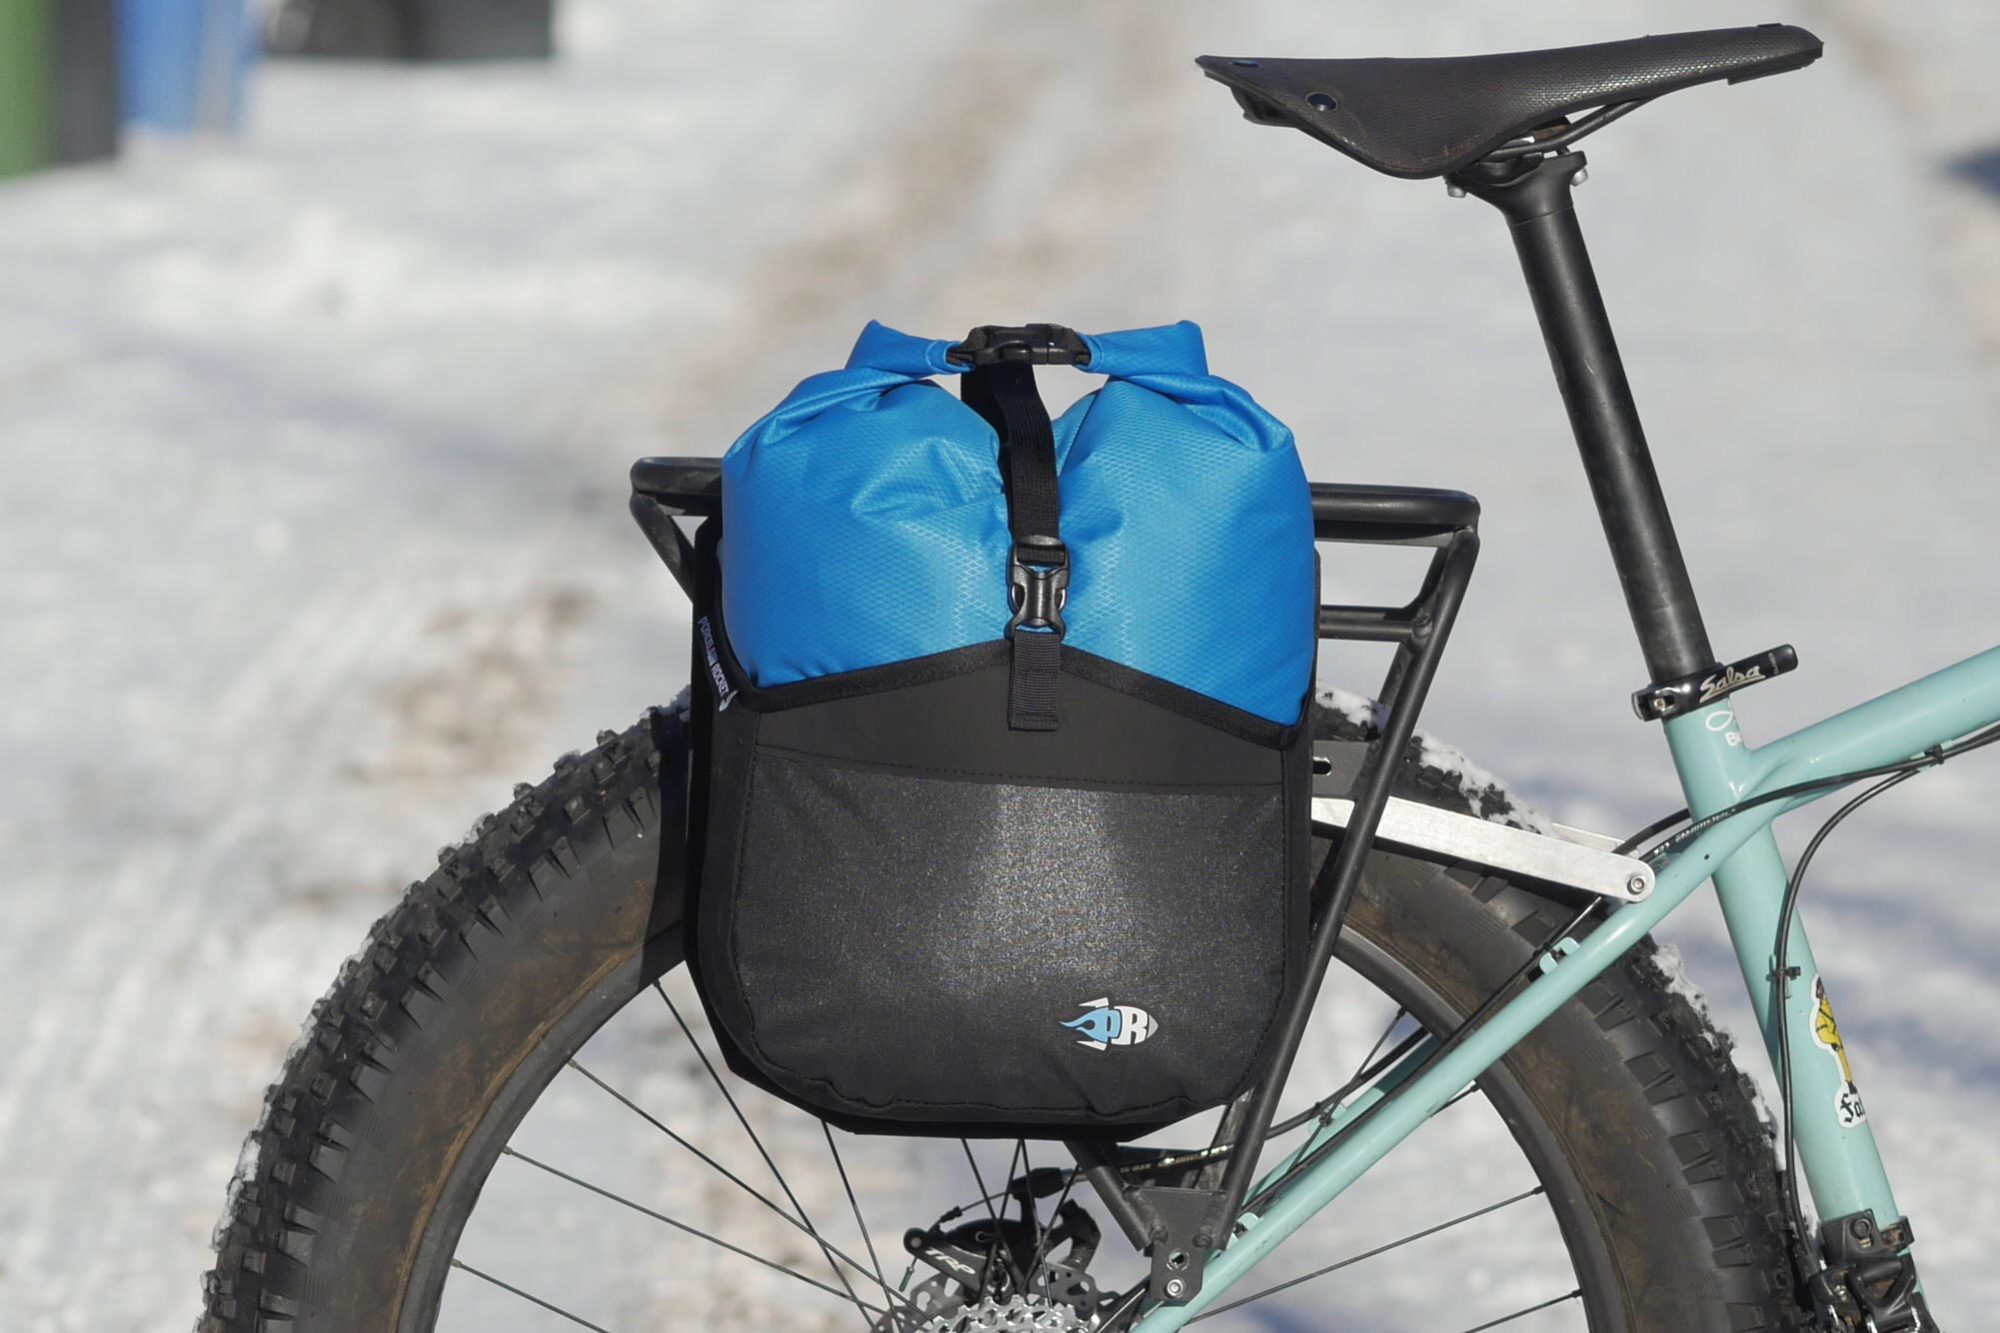 small bicycle panniers